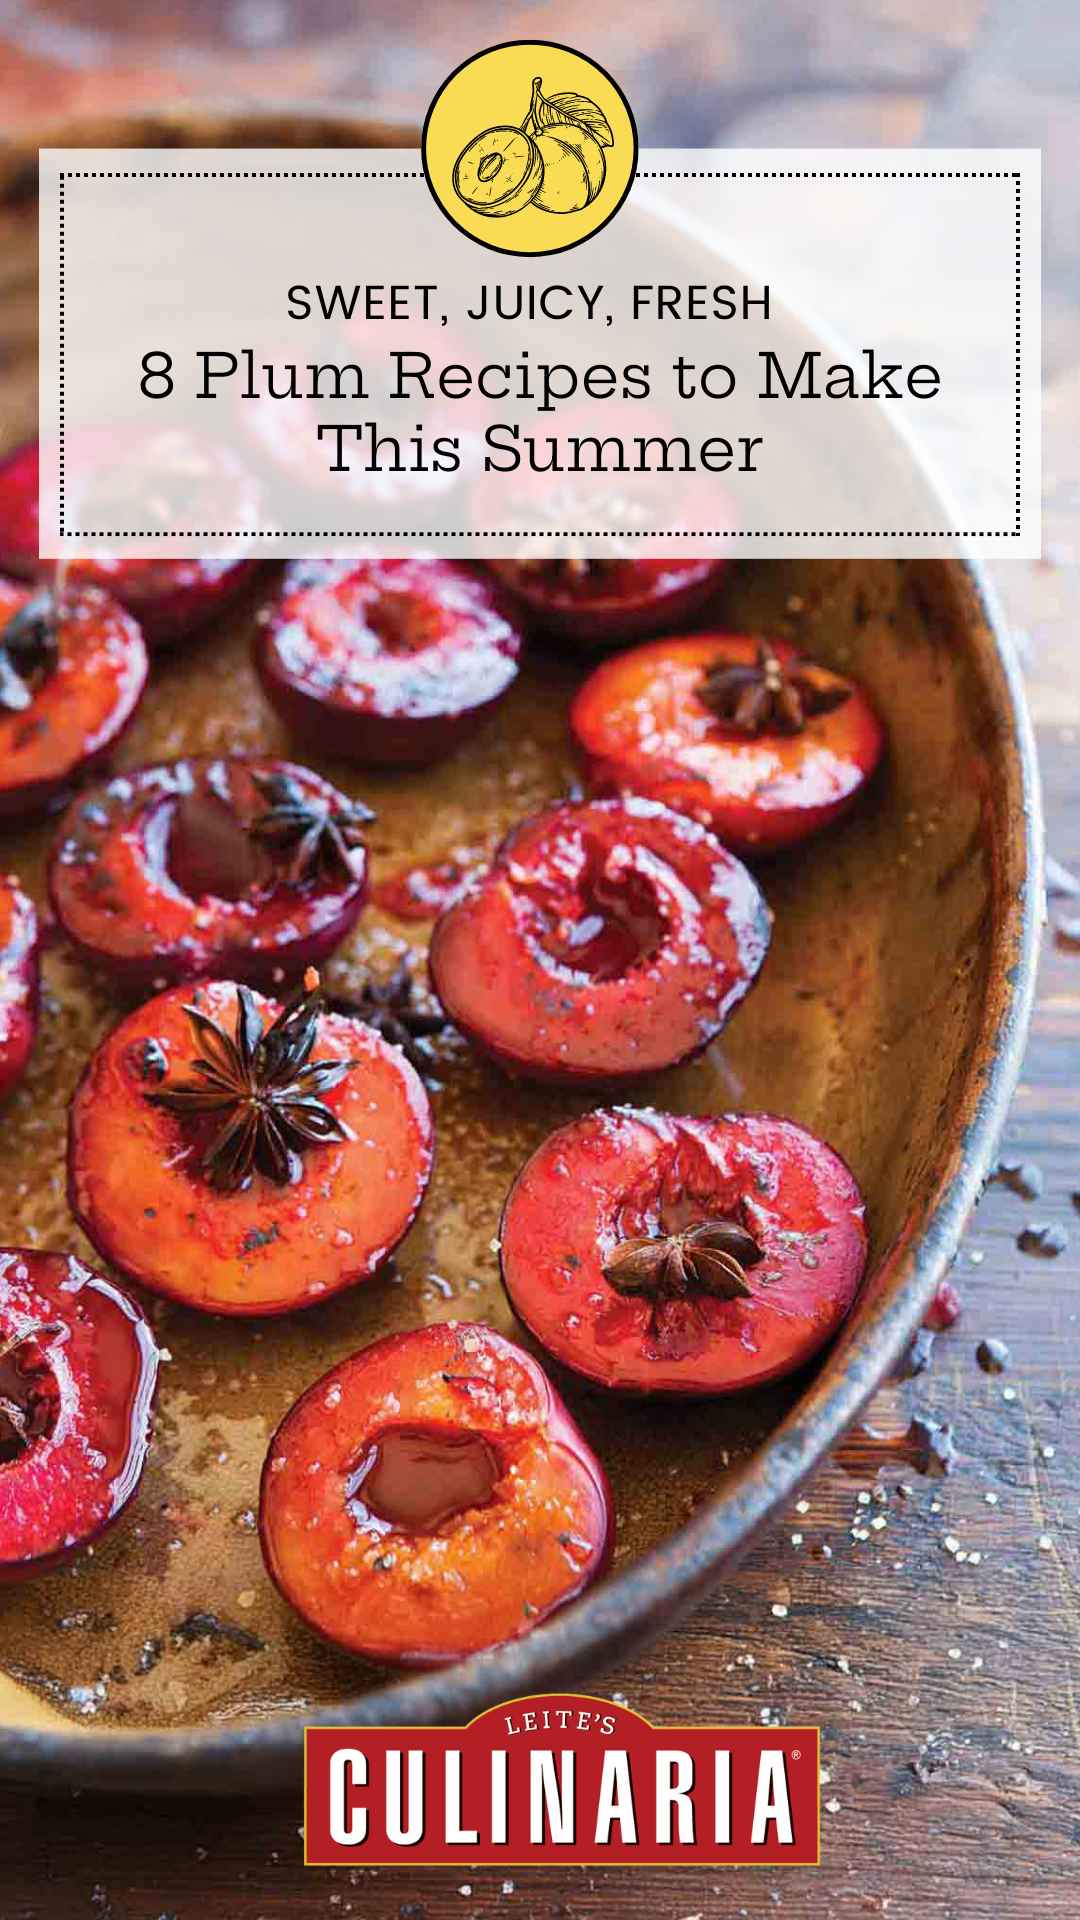 A dish of roasted plums.